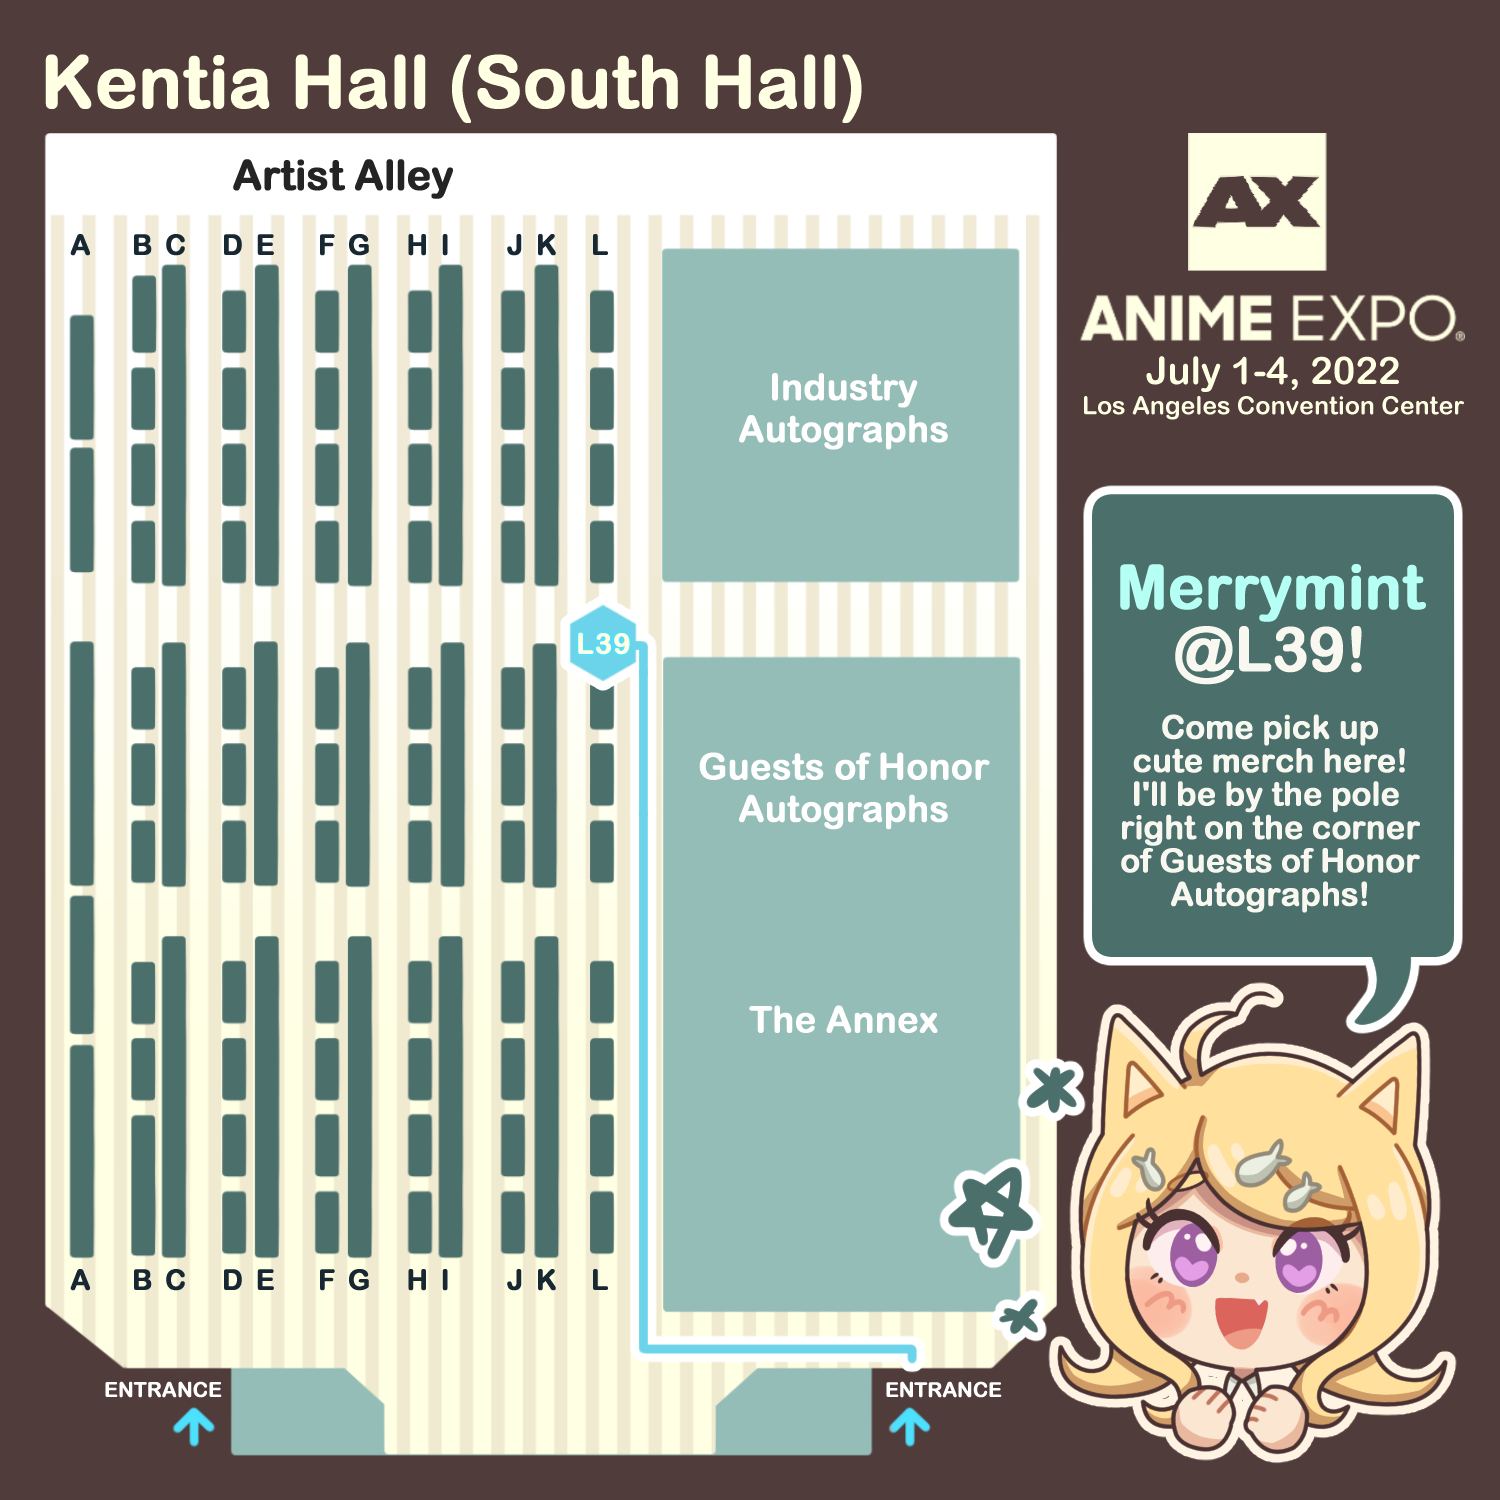 AX 2017 Schedule & Mobile App Now Available! - Anime Expo